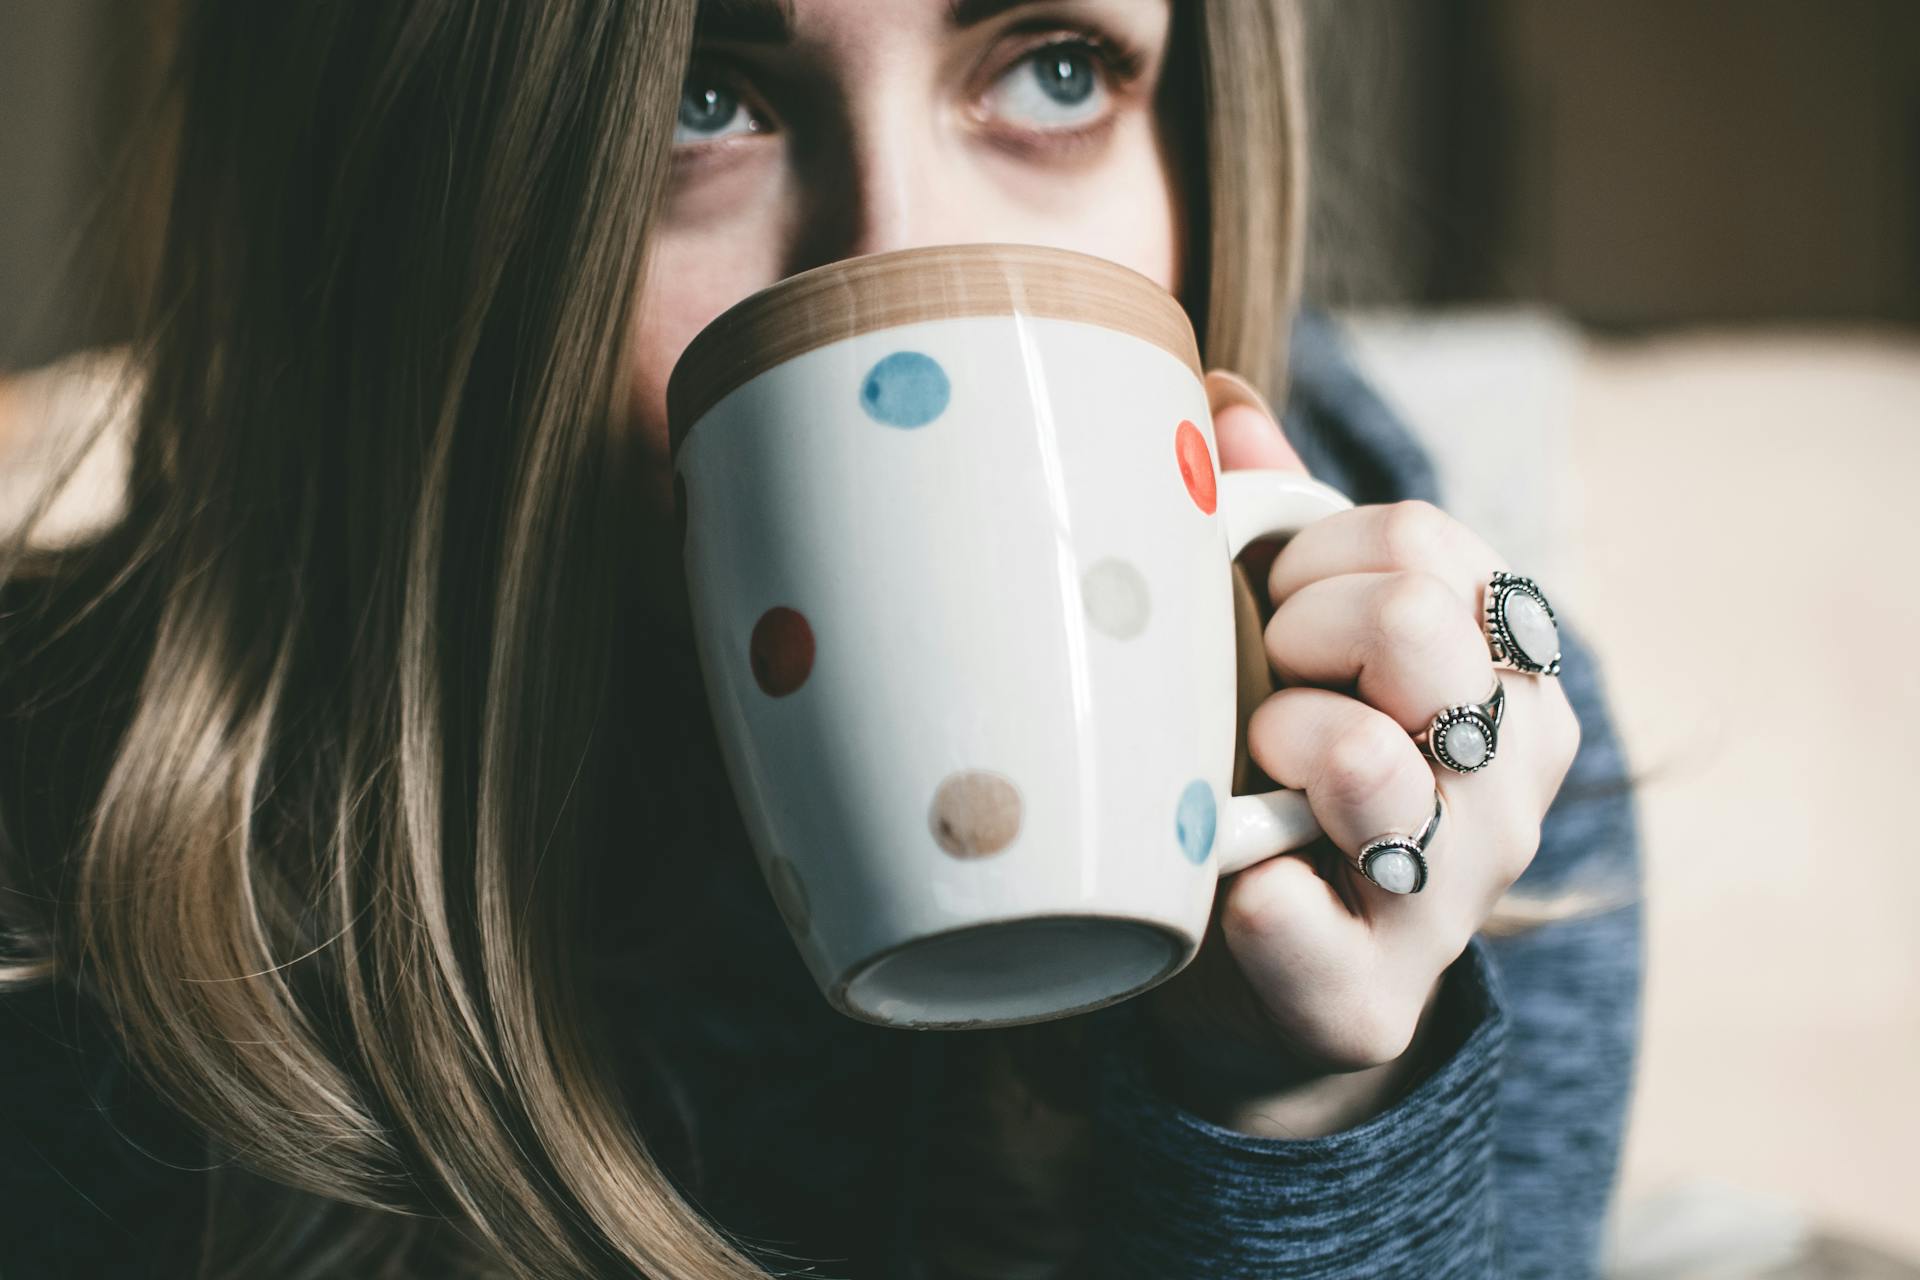 A woman drinking from a mug | Source: Pexels